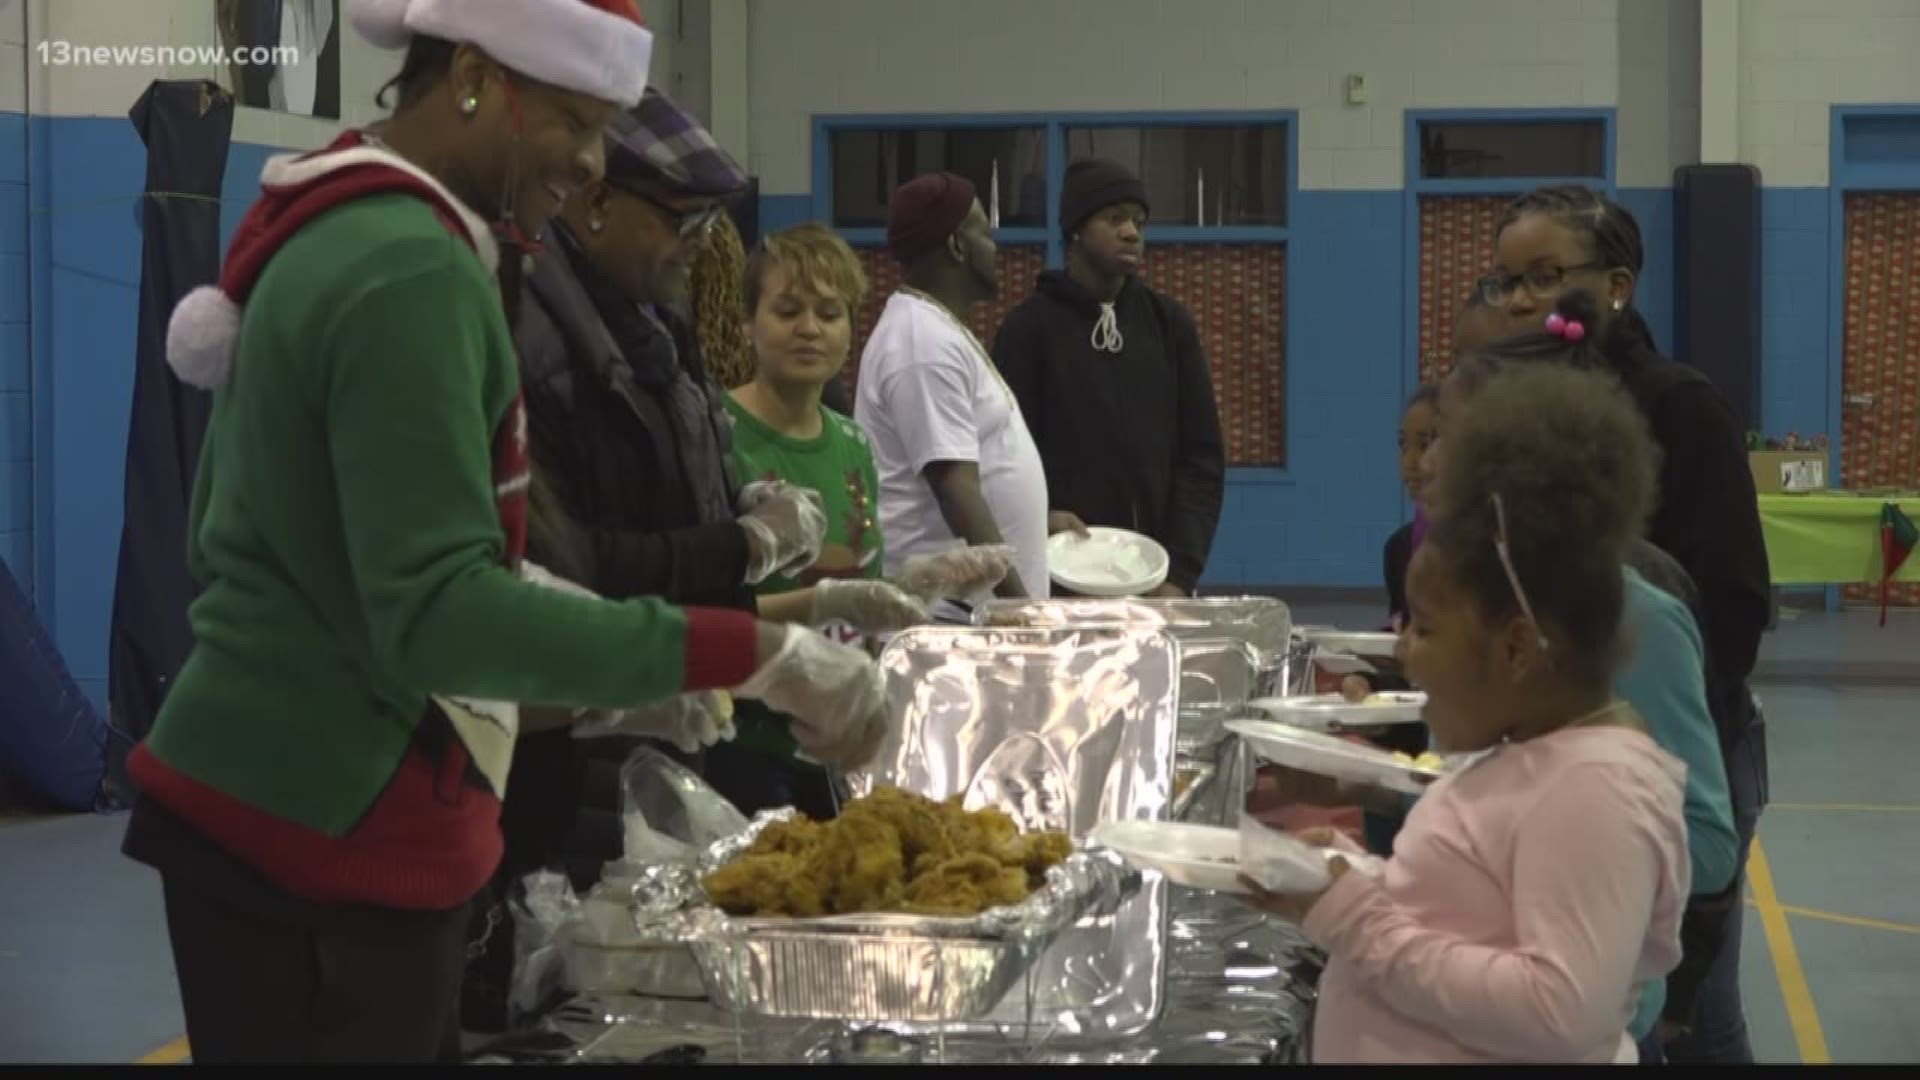 Iverson was back in his hometown of Newport News, handing out gifts and serving food to children at the same Boys and Girls Club he attended when he was a kid